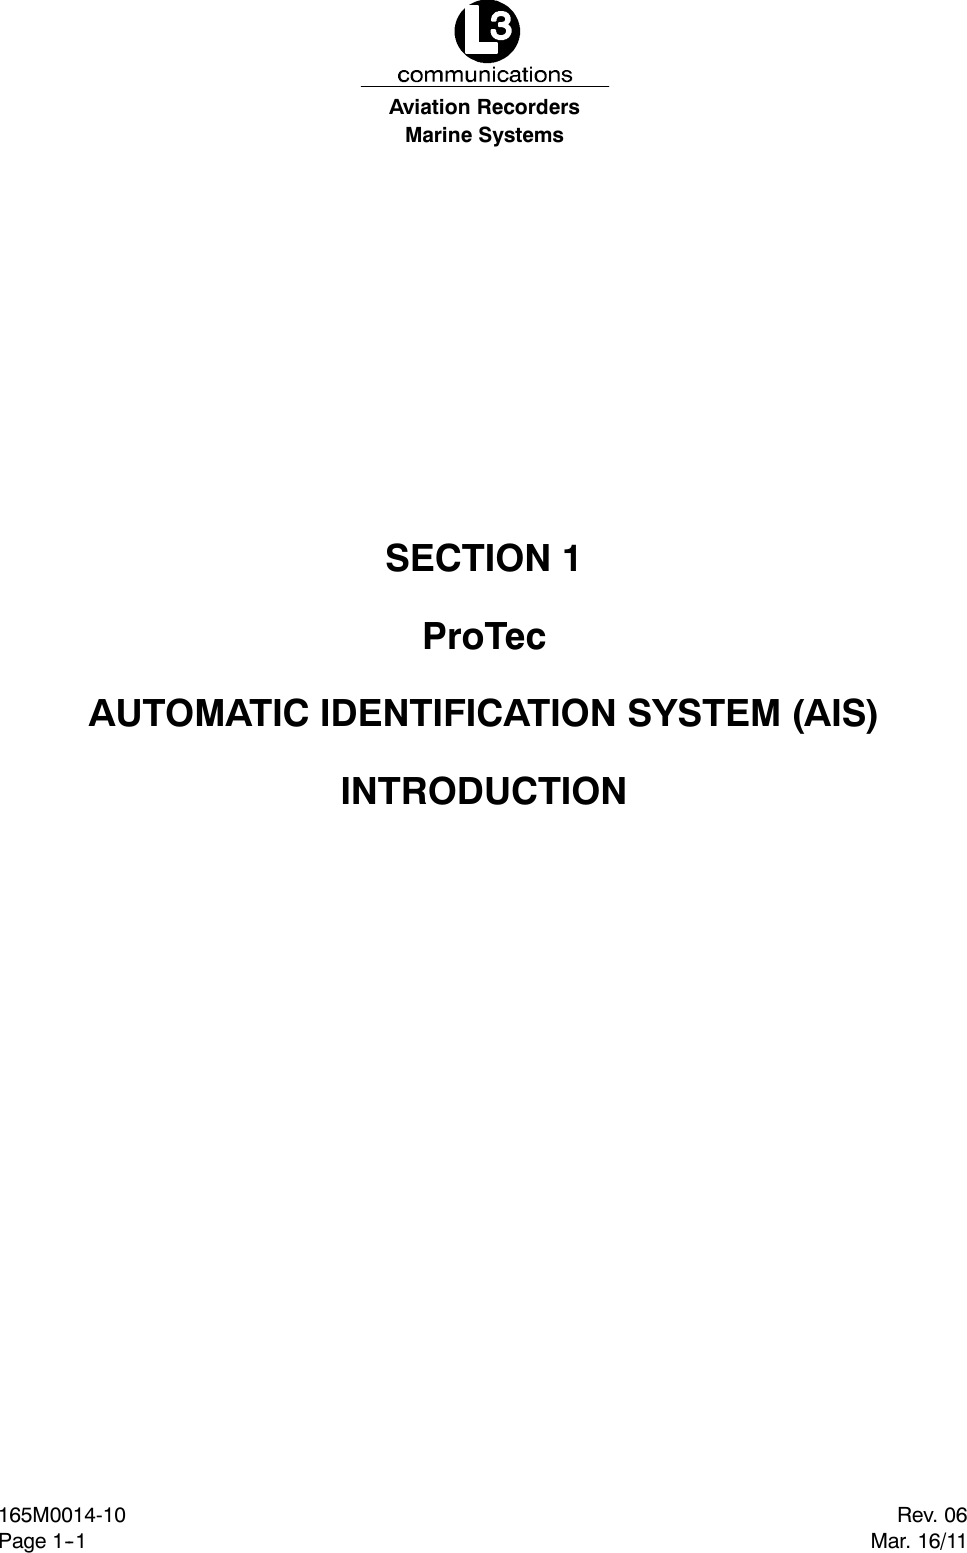 Marine SystemsAviation RecordersRev. 06Mar. 16/11165M0014-10Page 1--1SECTION 1ProTecAUTOMATIC IDENTIFICATION SYSTEM (AIS)INTRODUCTION